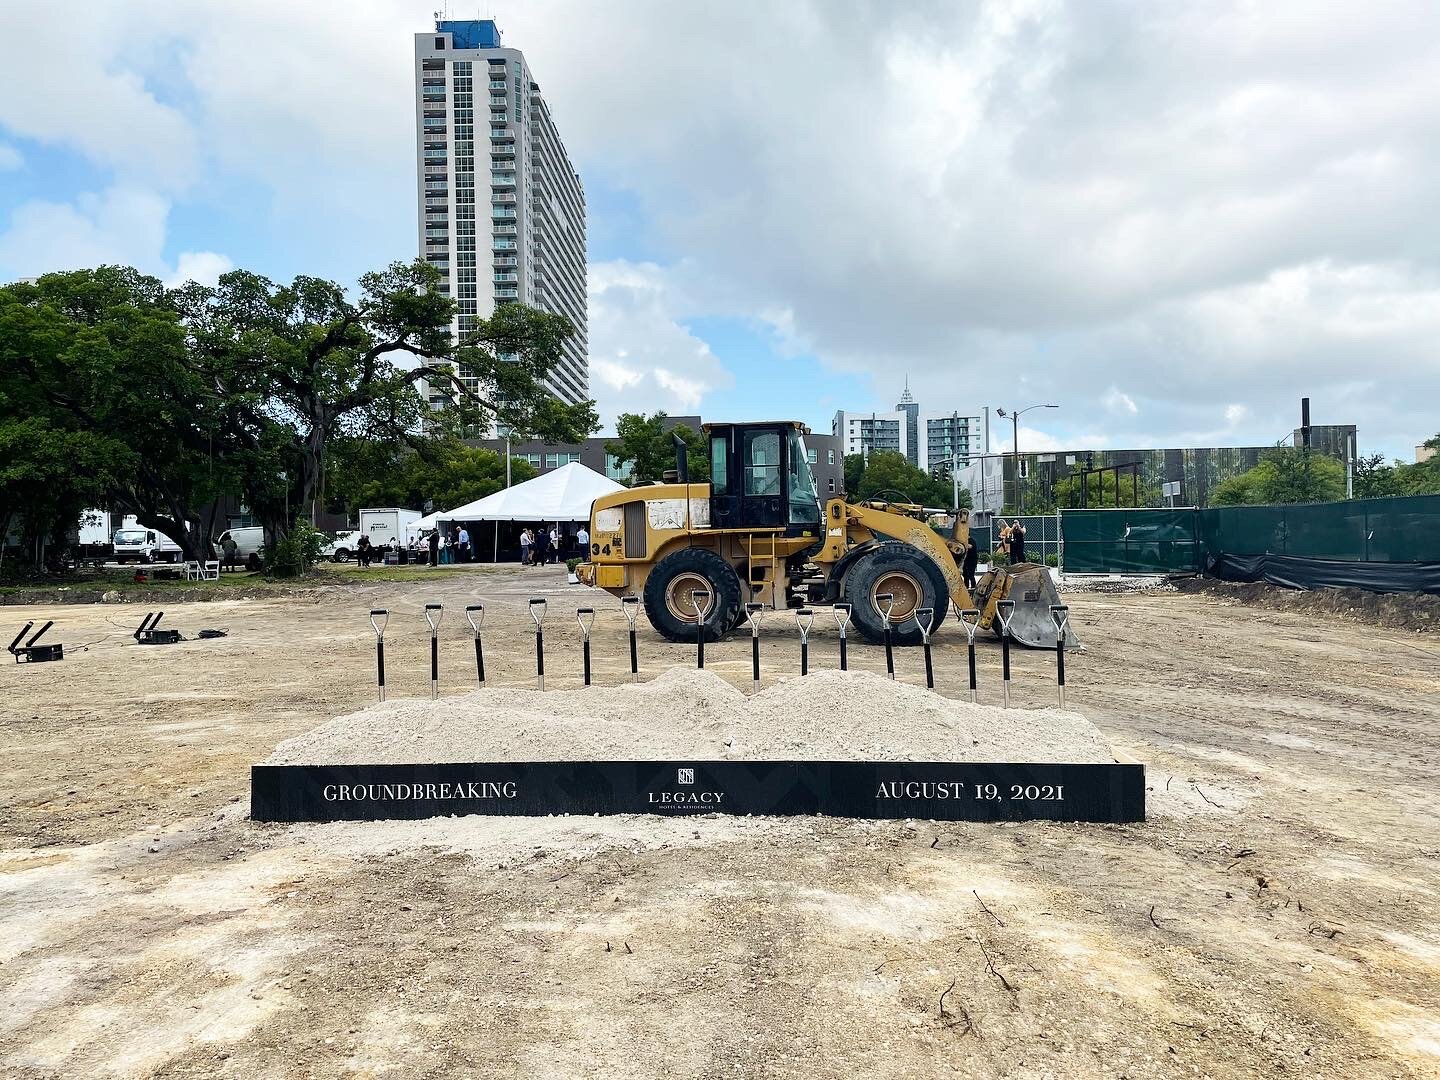 Legacy Hotel and Residences, America's First 'Covid-Conscious' Mixed-Use Tower Breaks Ground In Downtown Miami